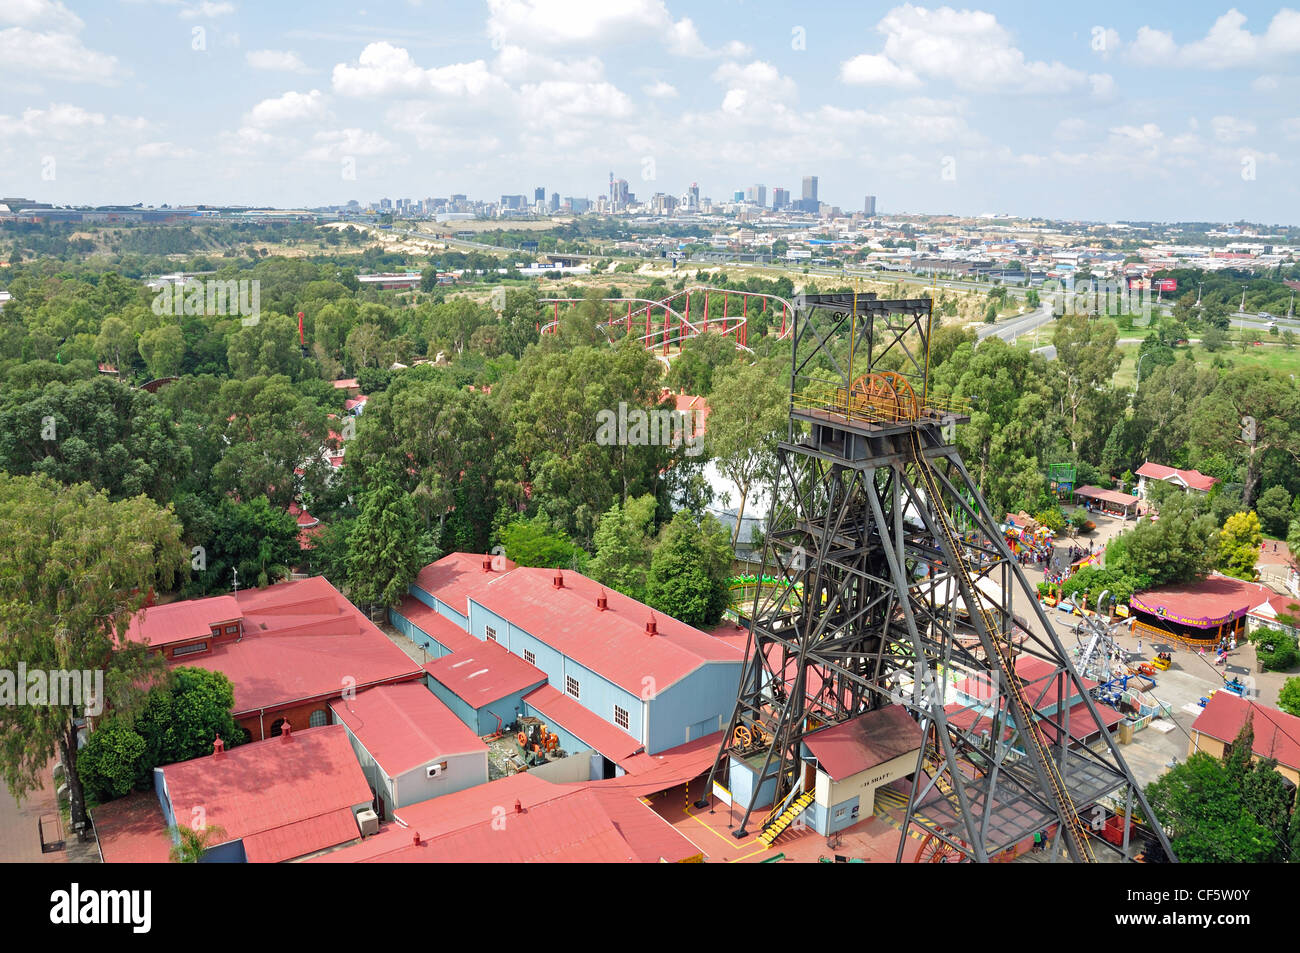 View of city and park from Giant Wheel at Gold Reef City Theme Park, Johannesburg, Gauteng Province, South Africa Stock Photo